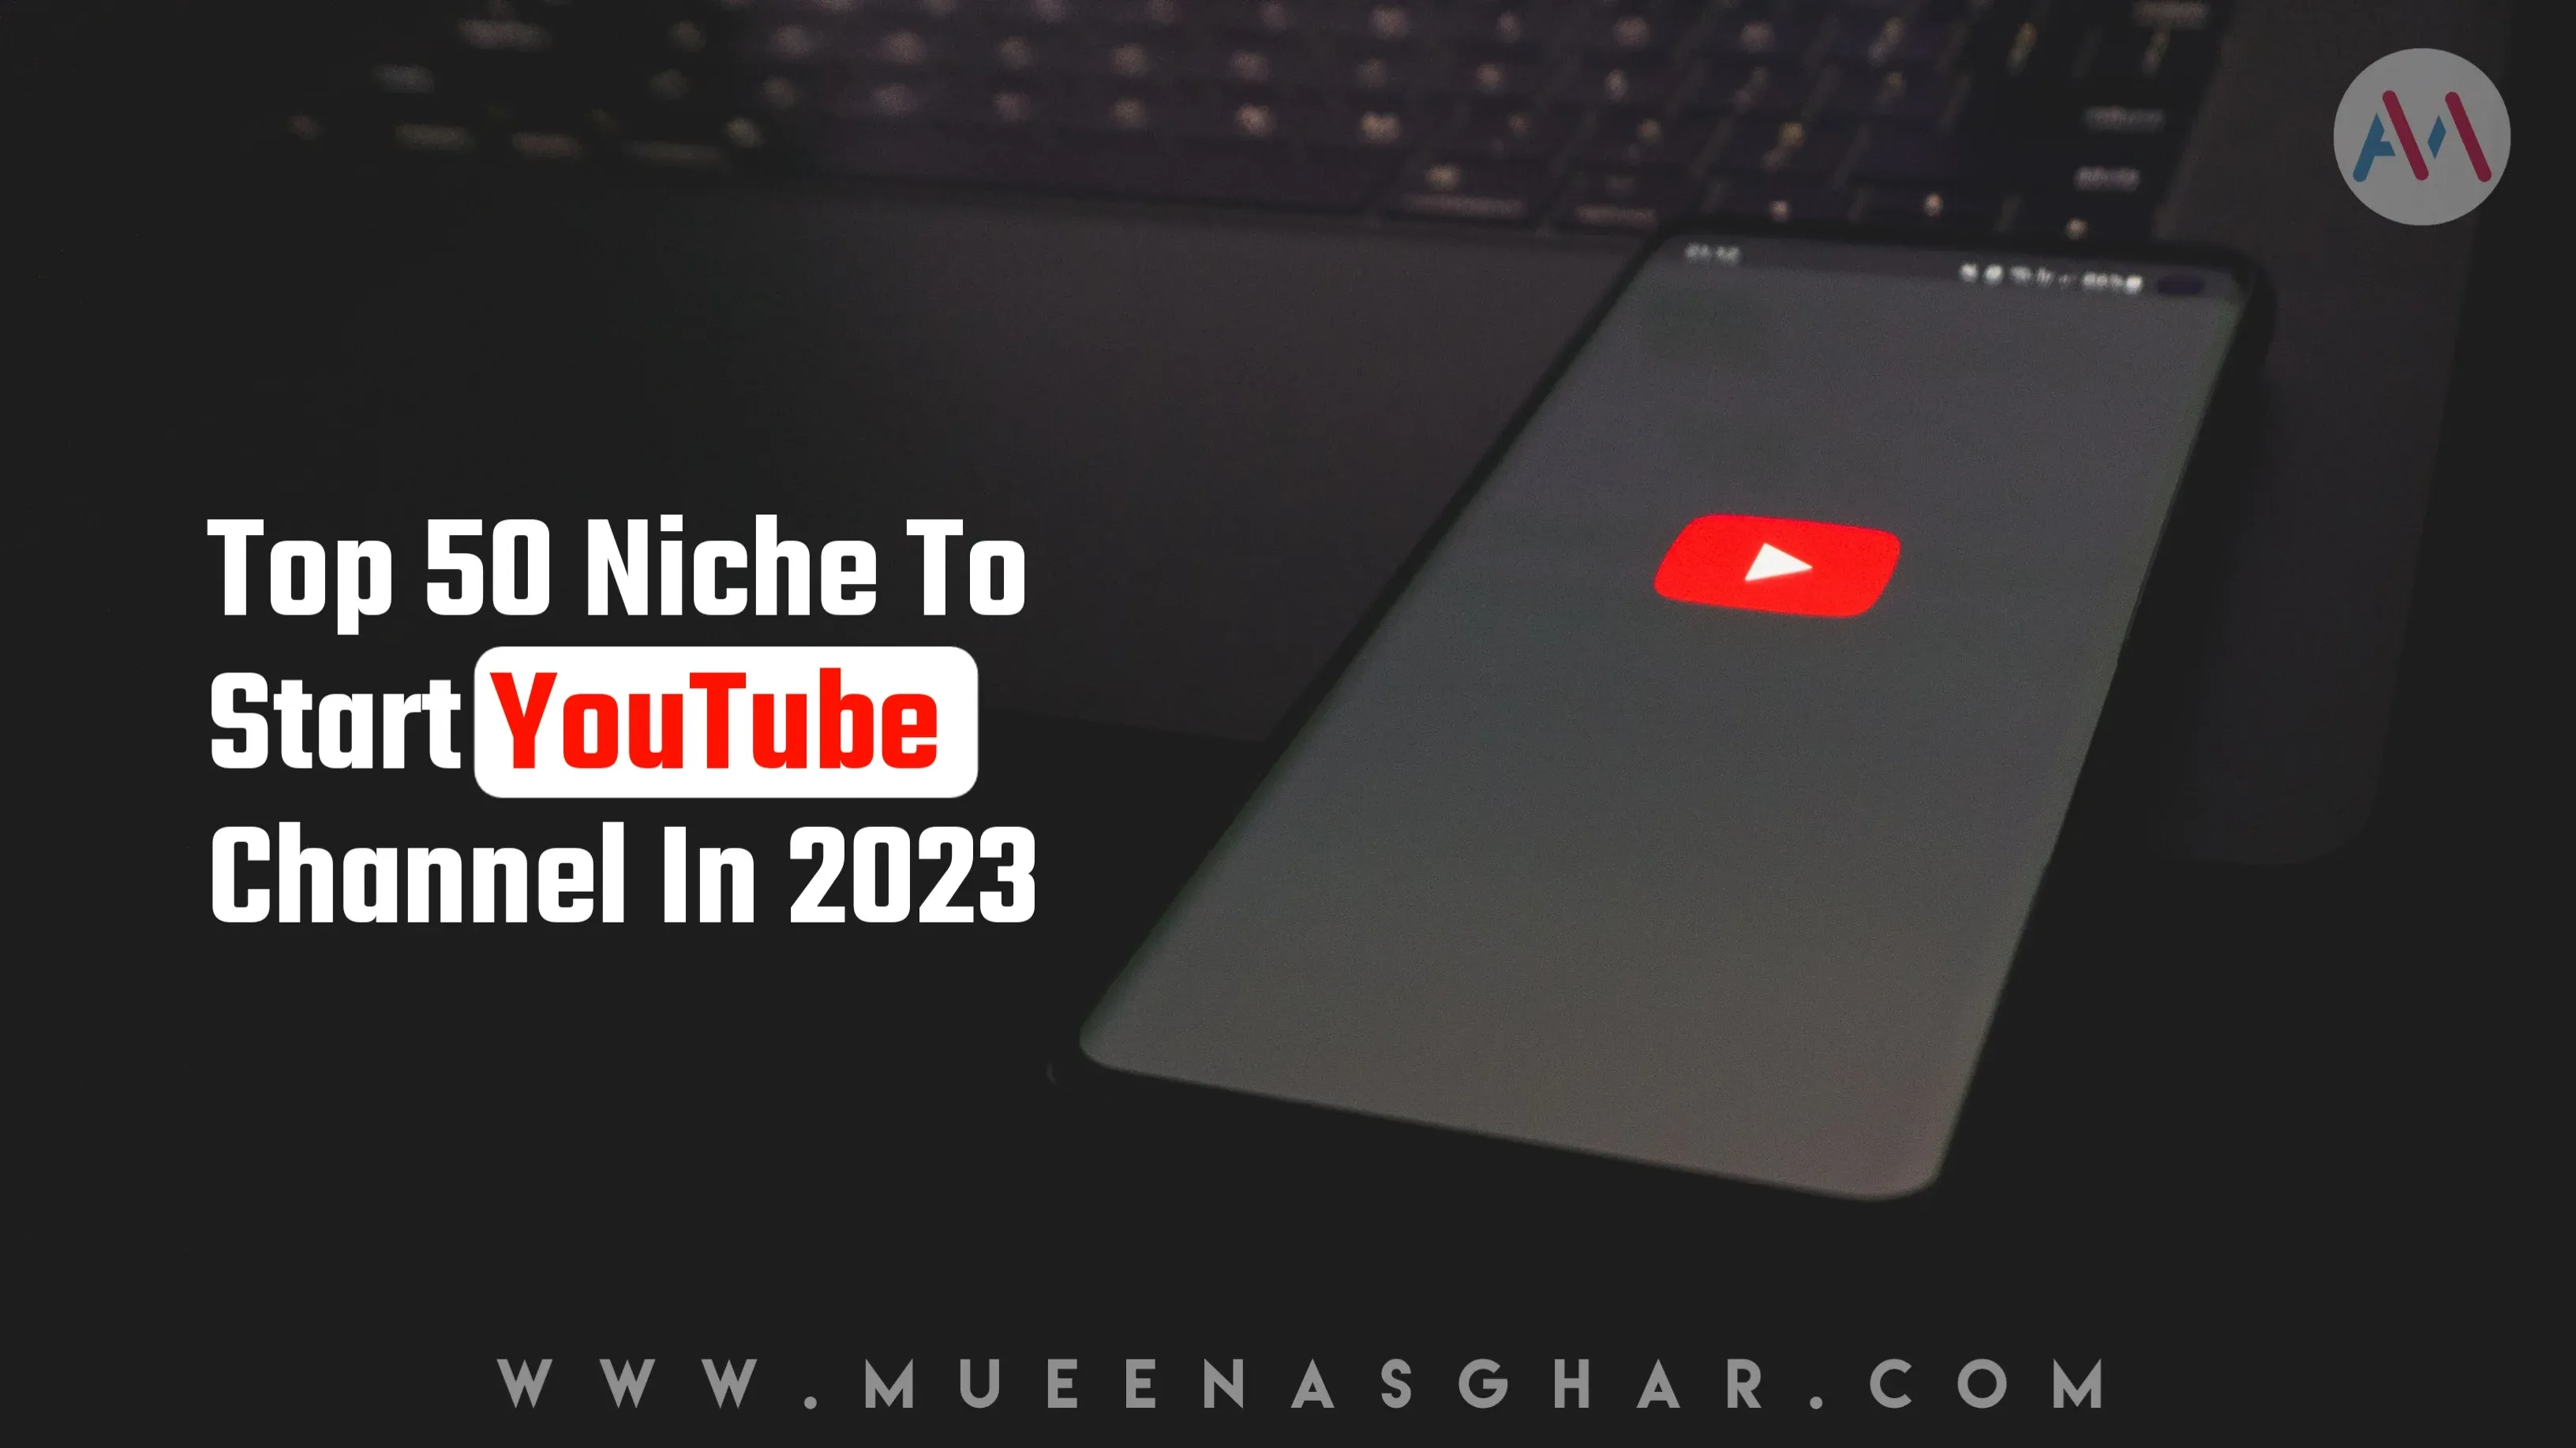 Top 50 Niche To Start YouTube Channel In 2023